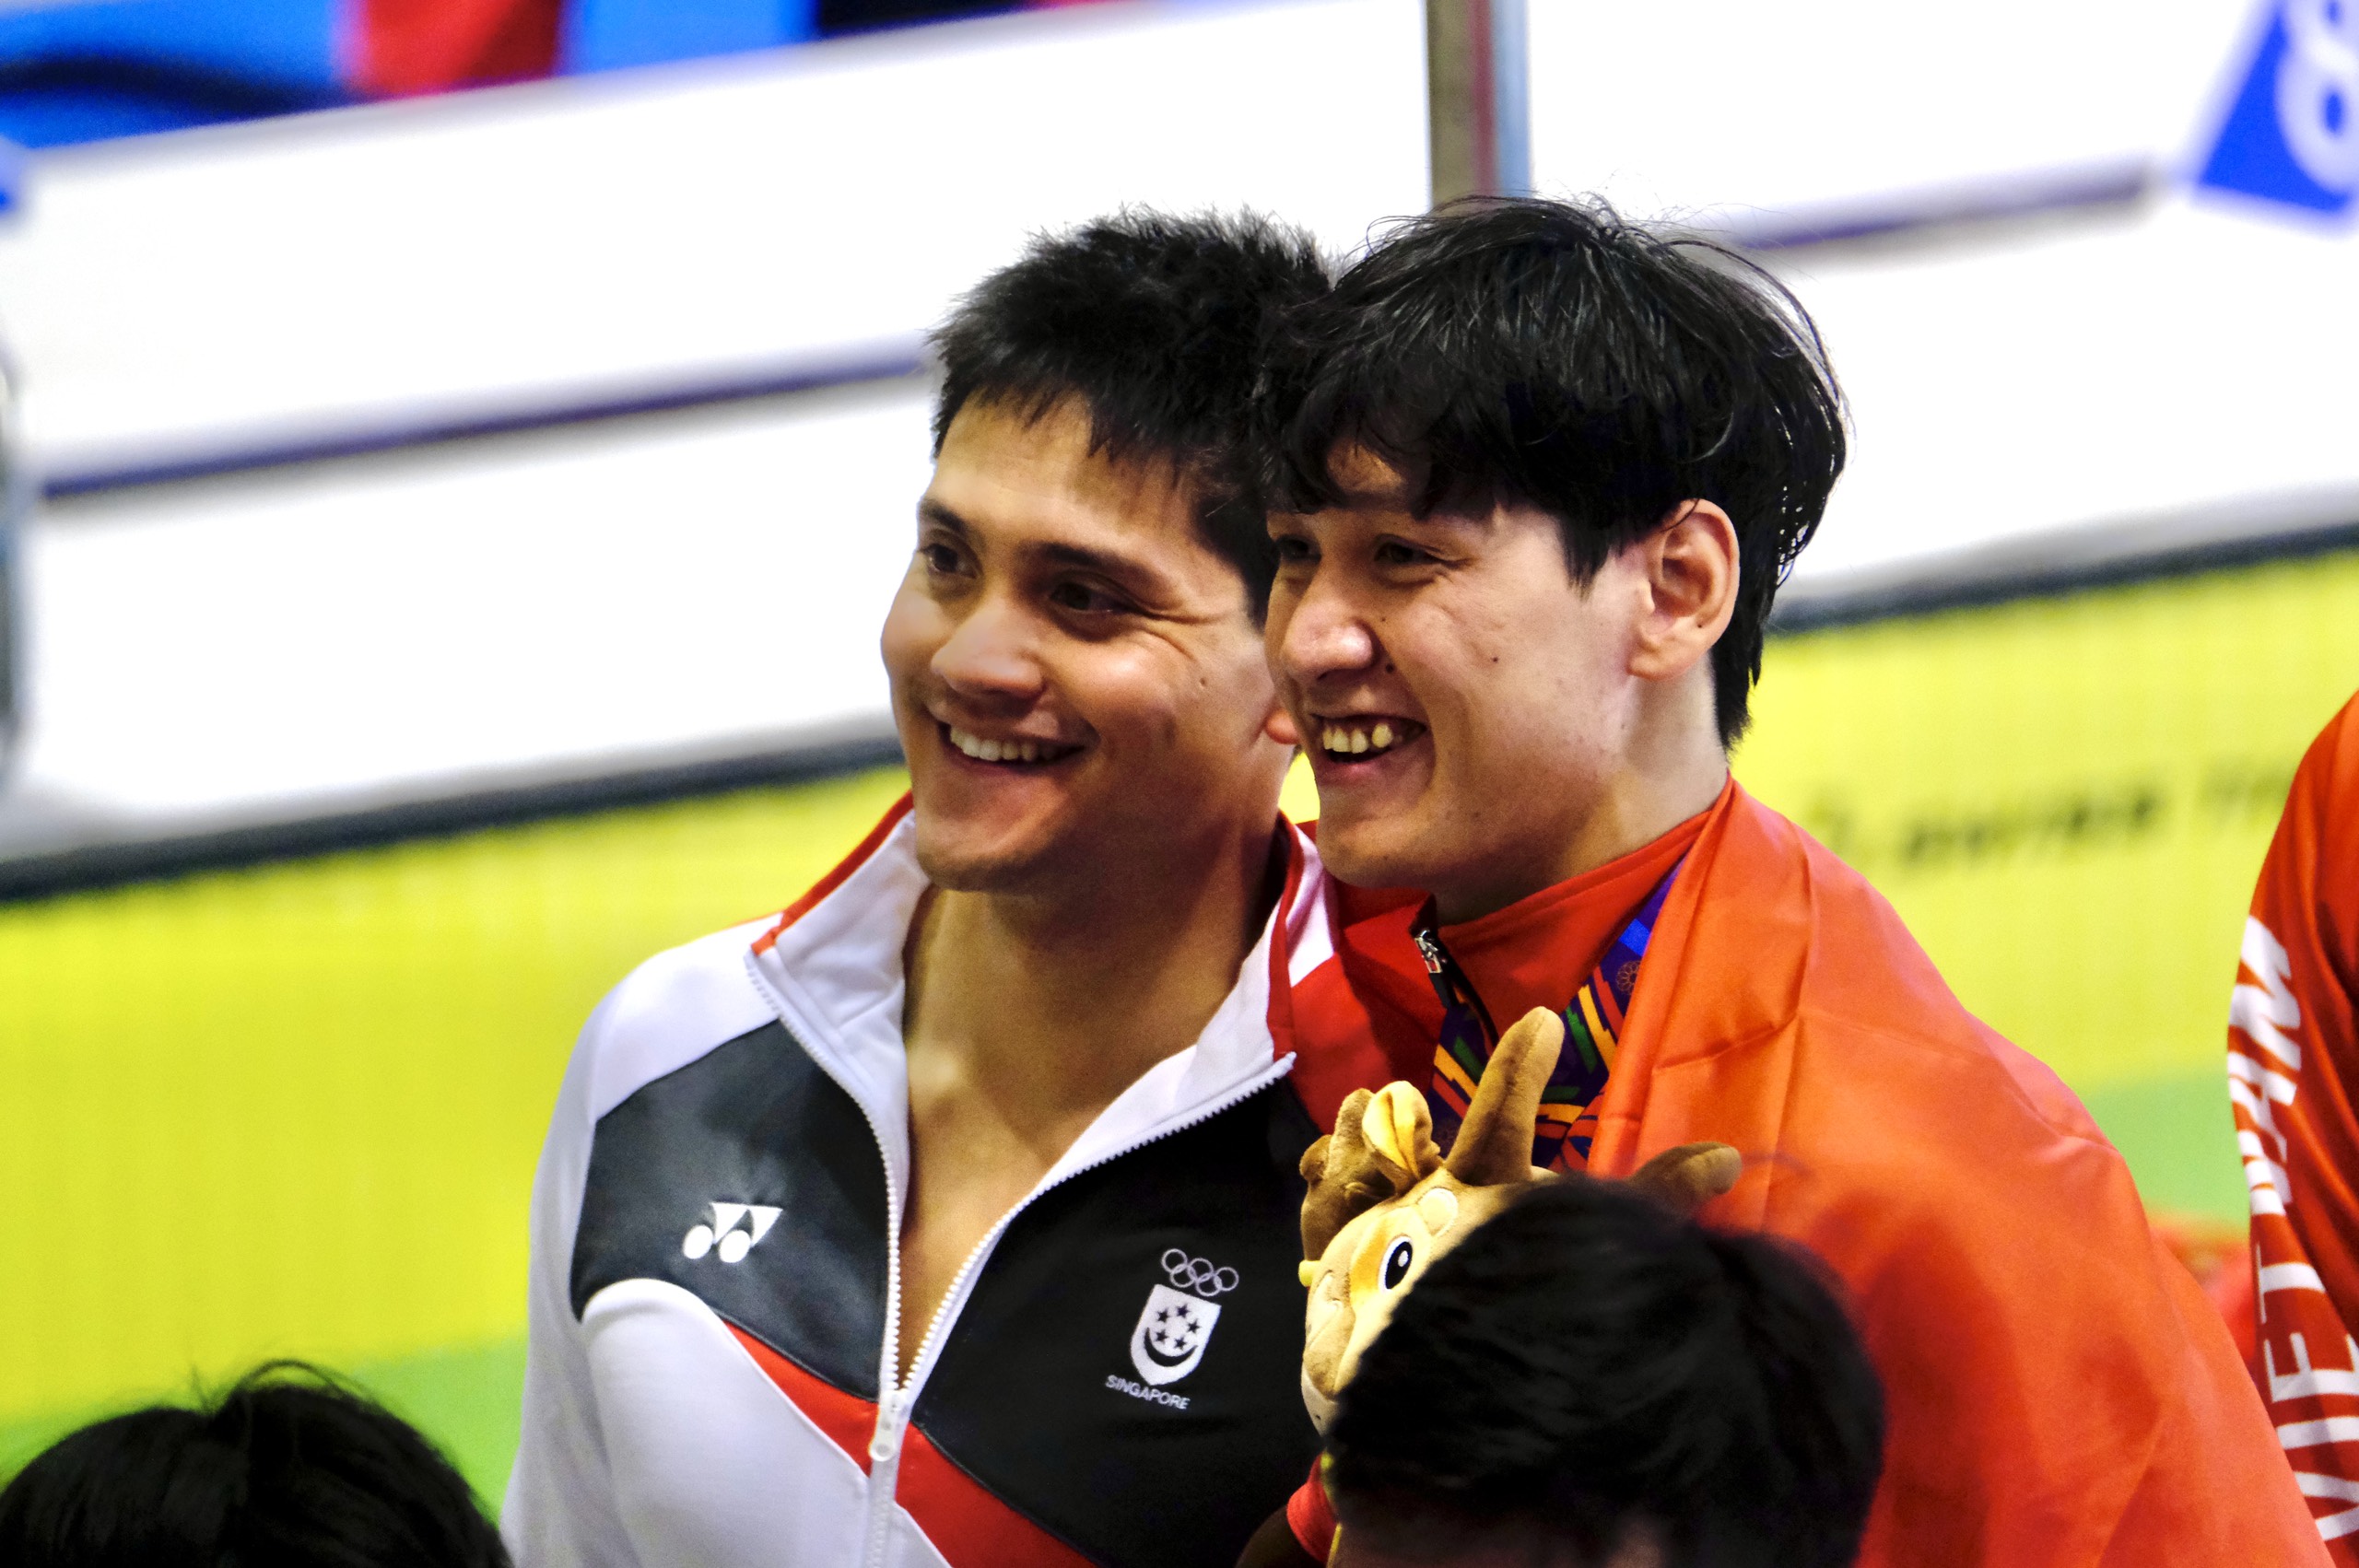 2016 Olympic champion Joseph Schooling of Singapore (L) poses for a photo with Vietnamese swimmer Hoang Quy Phuoc after the men’s freestyle 4x200m relay event at the 31st Southeast Asian (SEA) Games at My Dinh Water Sports Center in Hanoi, May 17, 2022. Photo: Nam Tran / Tuoi Tre